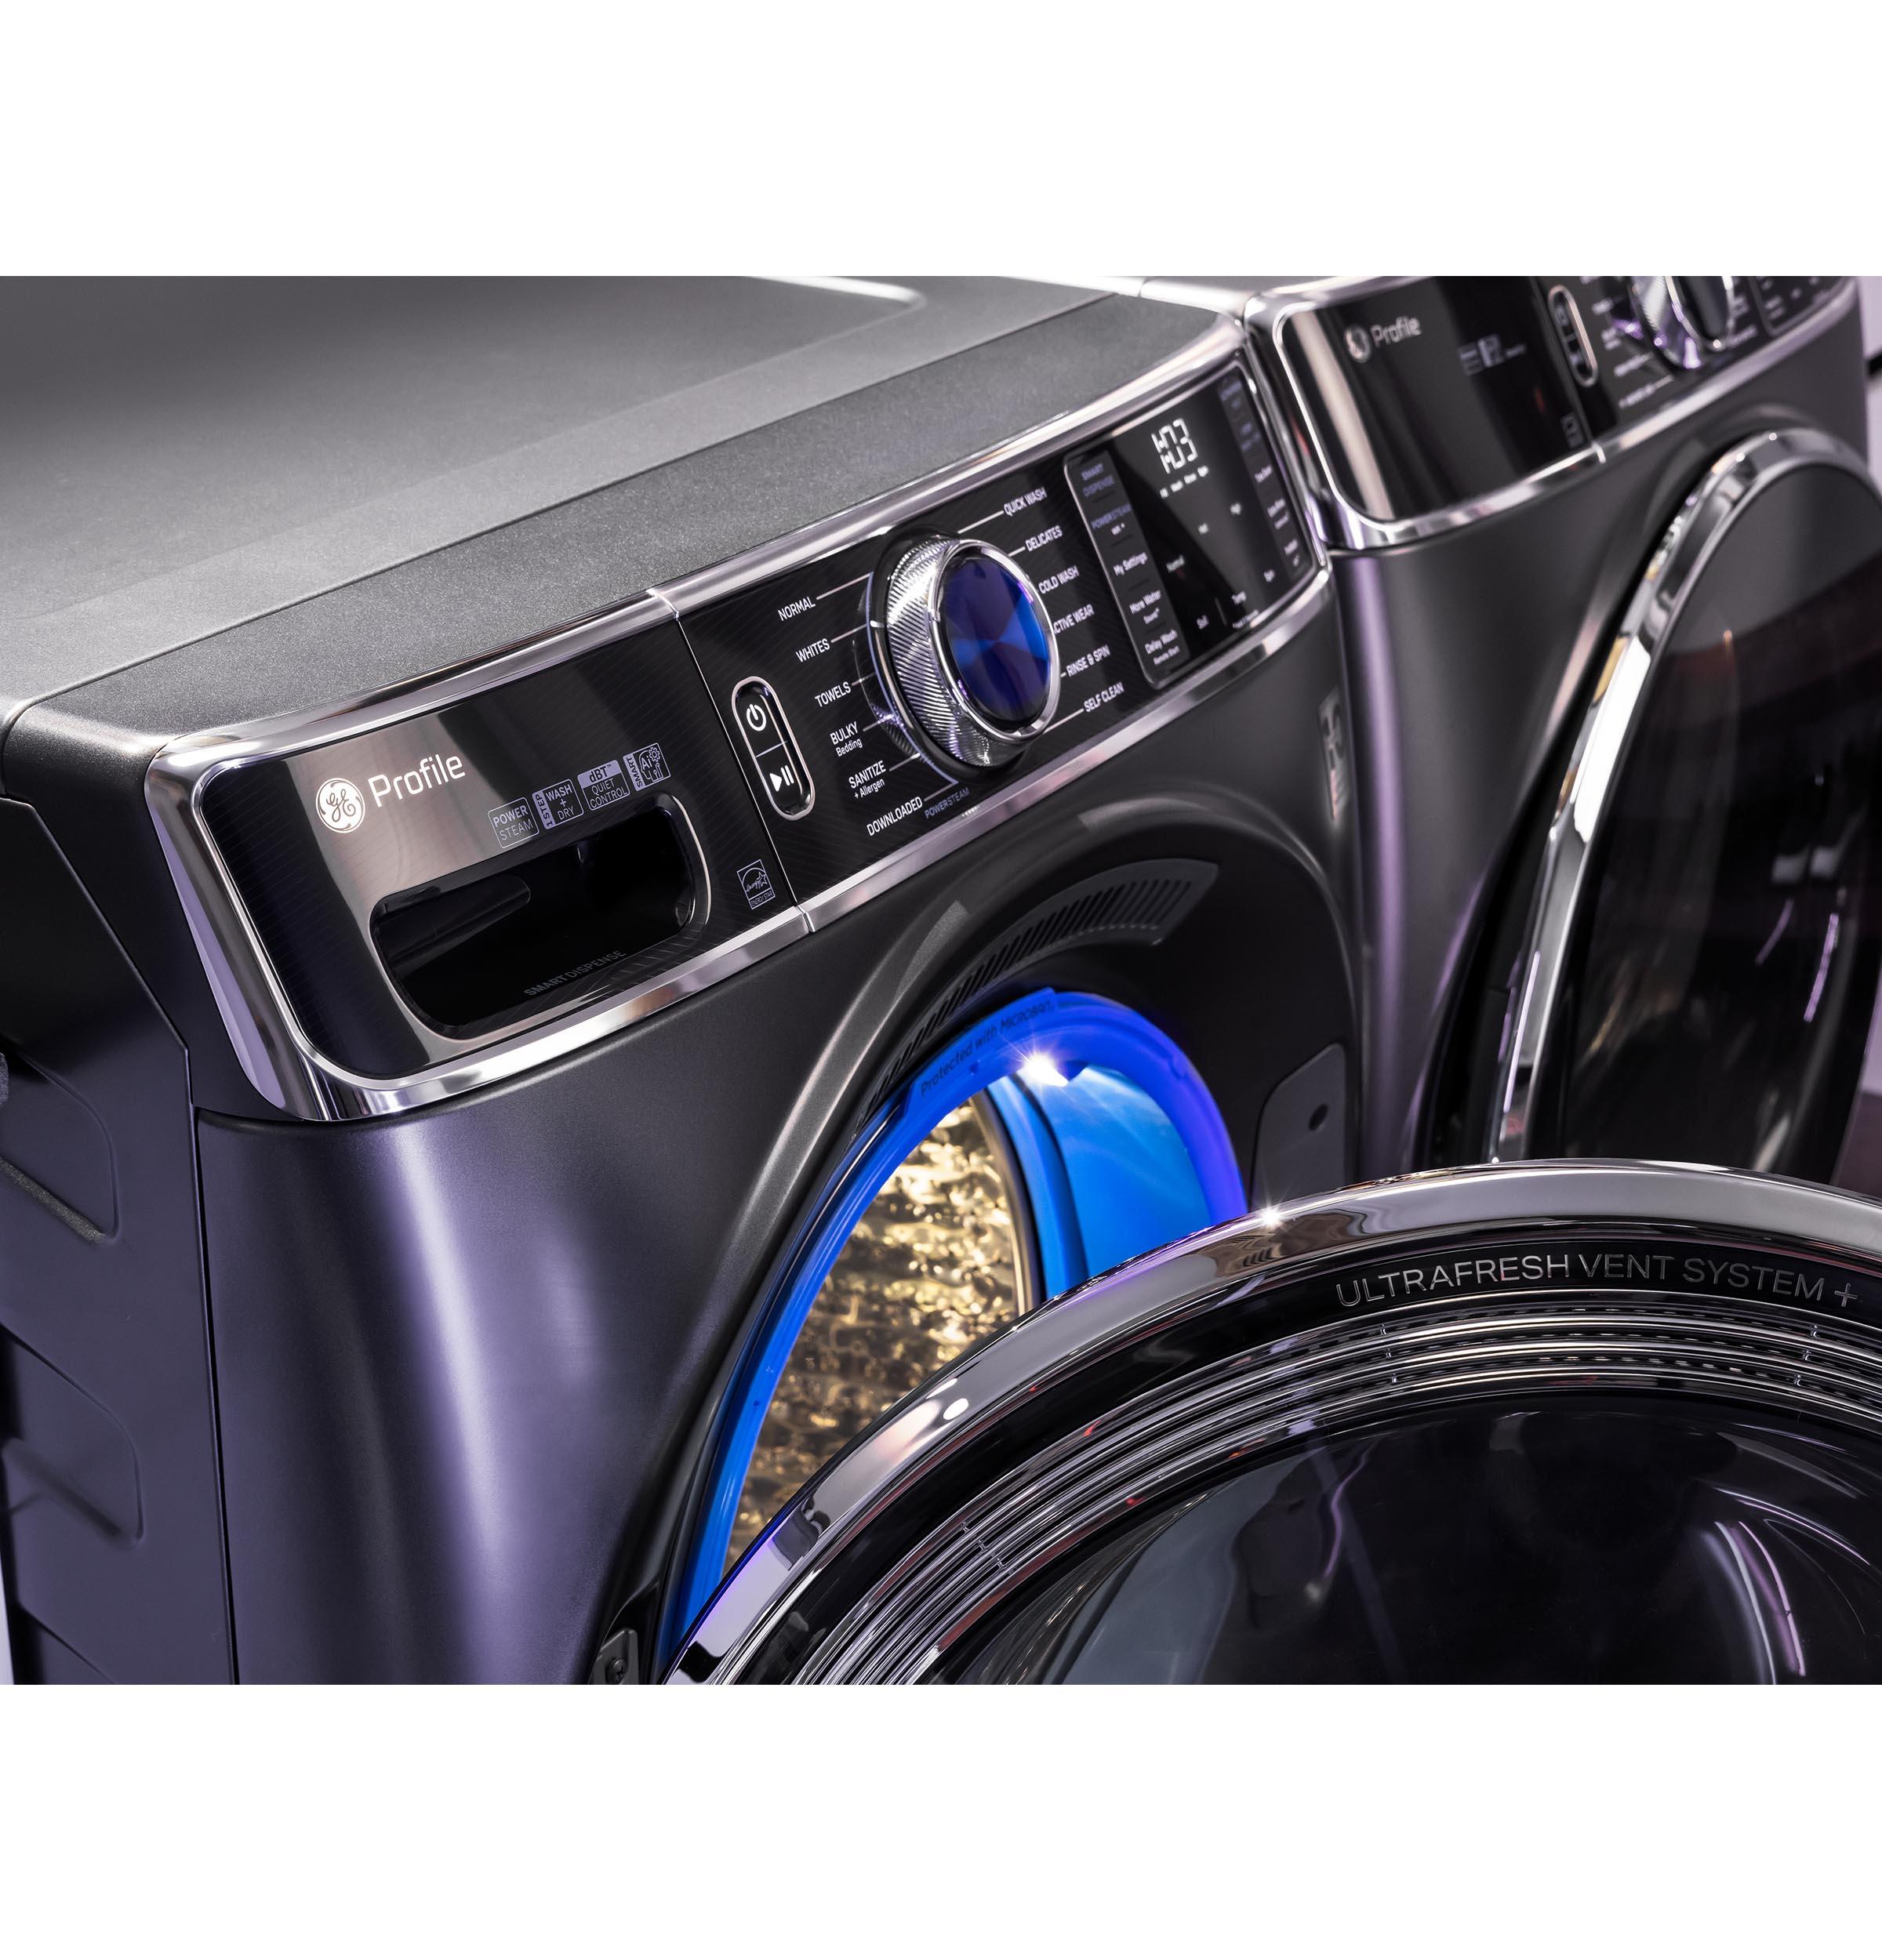 GE Profile™ ENERGY STAR® 7.8 cu. ft. Capacity Smart Front Load Gas Dryer with Steam and Sanitize Cycle